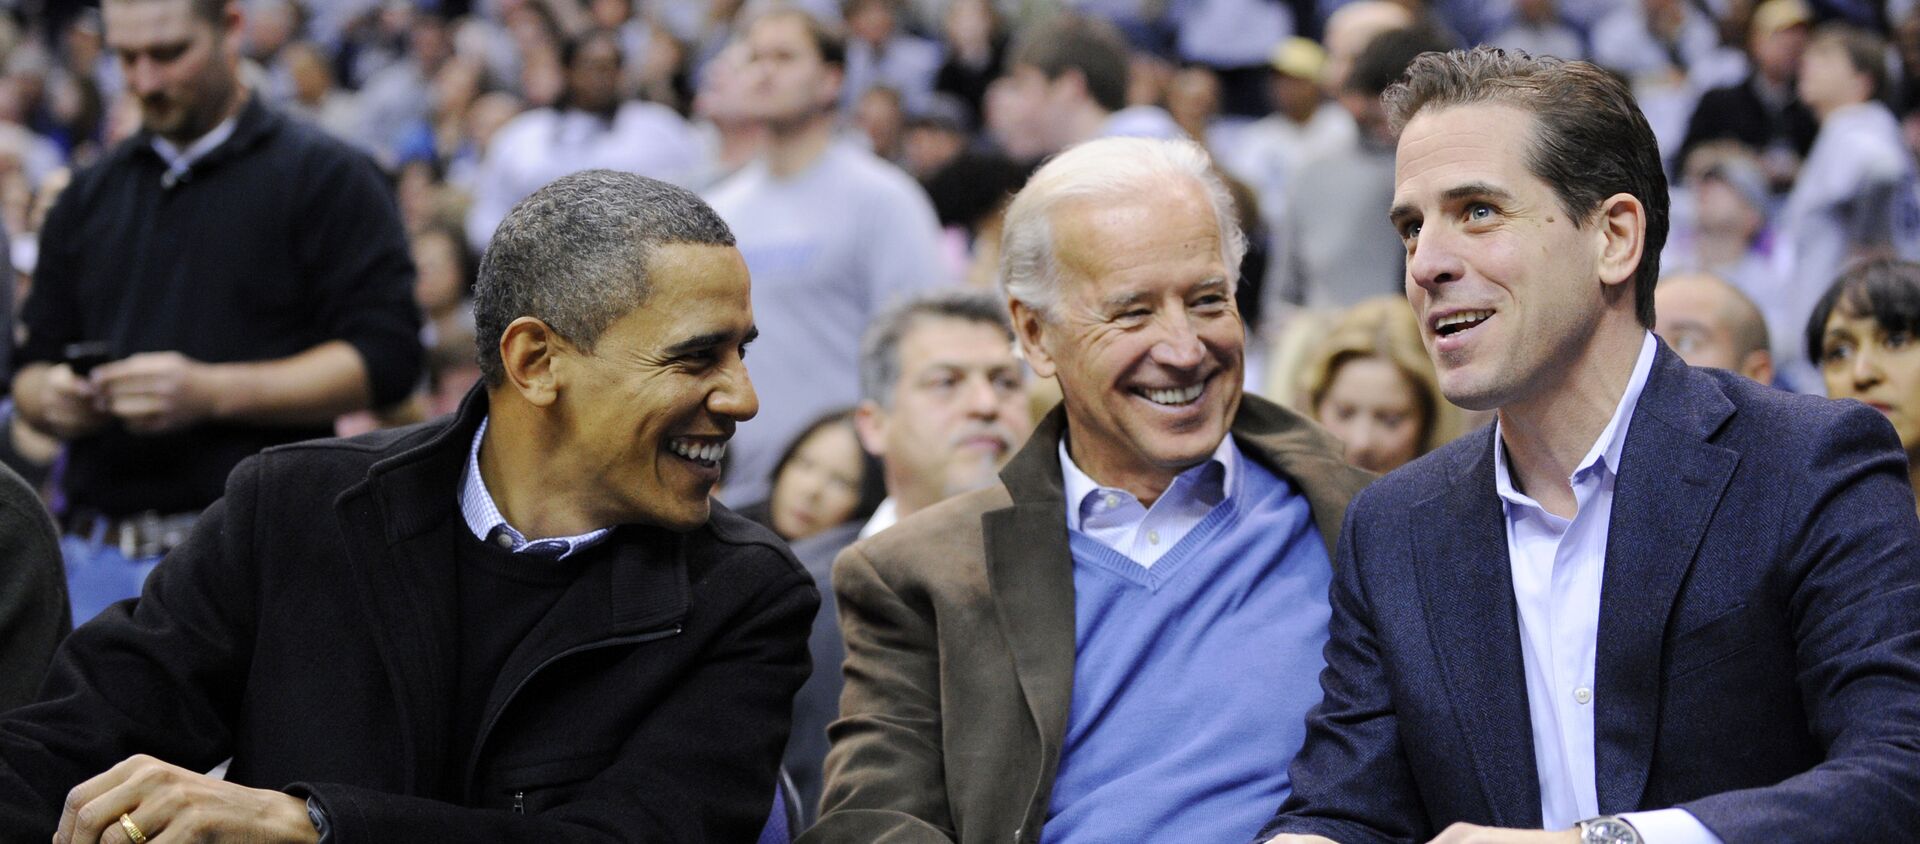 This Jan. 30, 2010 file photo shows Hunter Biden, right, son of Vice President Joe Biden, center, talking with President Barack Obama, and the vice president Joe Biden during a college basketball game in Washington.  Biden's youngest son Hunter is joining the Navy. The Navy says the attorney and former Washington lobbyist was selected to be commissioned into the Navy Reserve as a public affairs officer. Because he is 42, he needed a special waiver to be accepted, but that is not uncommon. He is one of seven candidates recommended for a direct commission for public affairs.  - Sputnik International, 1920, 07.02.2021